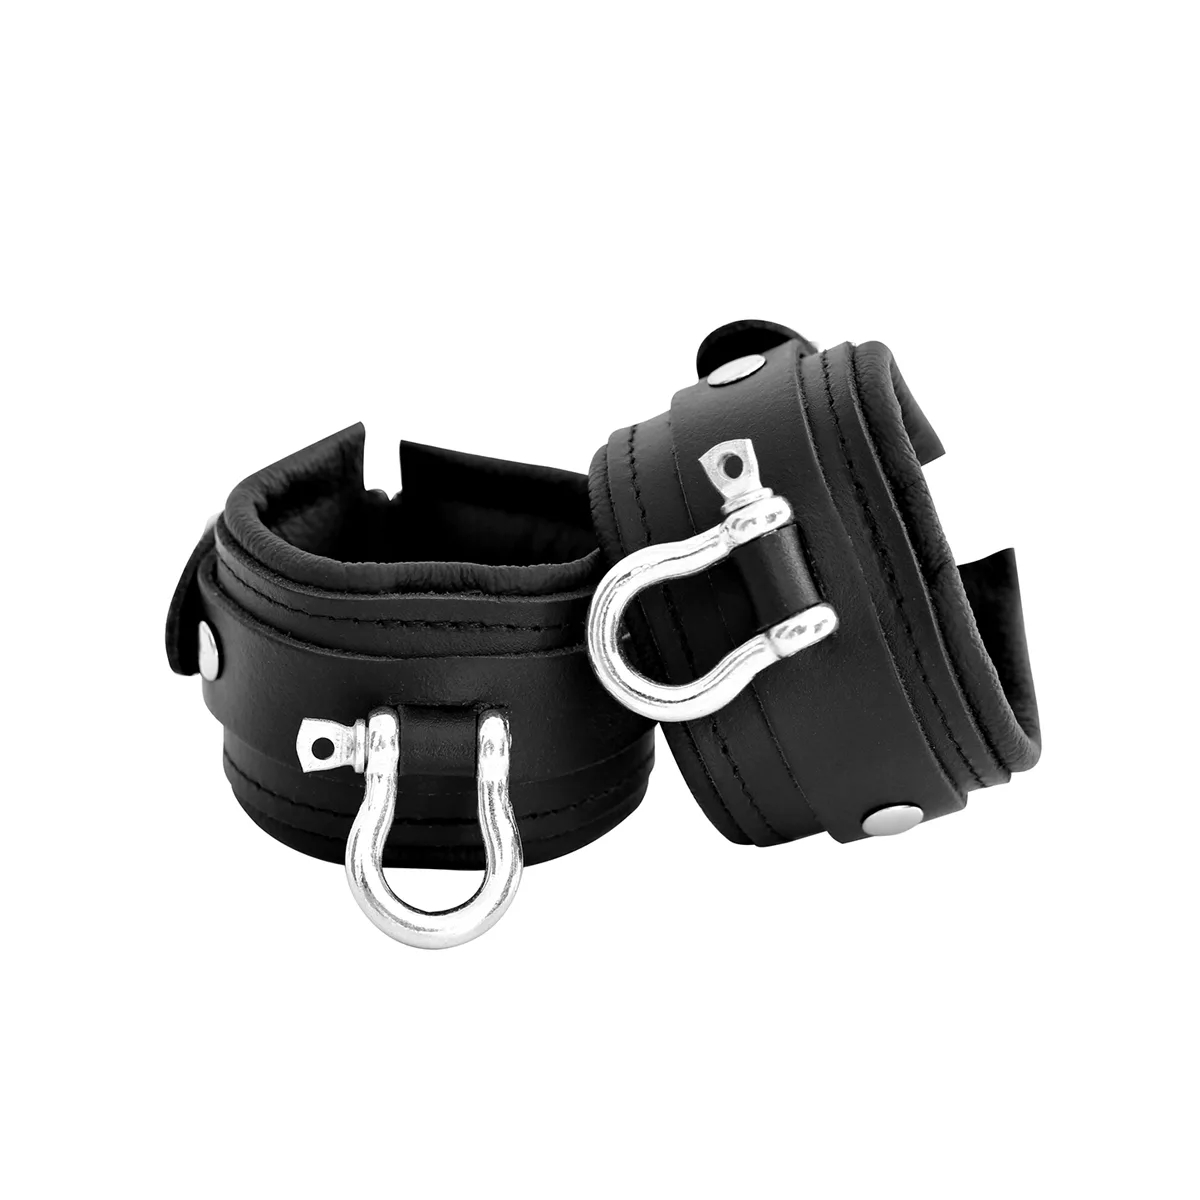 Leather-Handcuffs-with-Metal-Shackle-134-KIO-0371-6